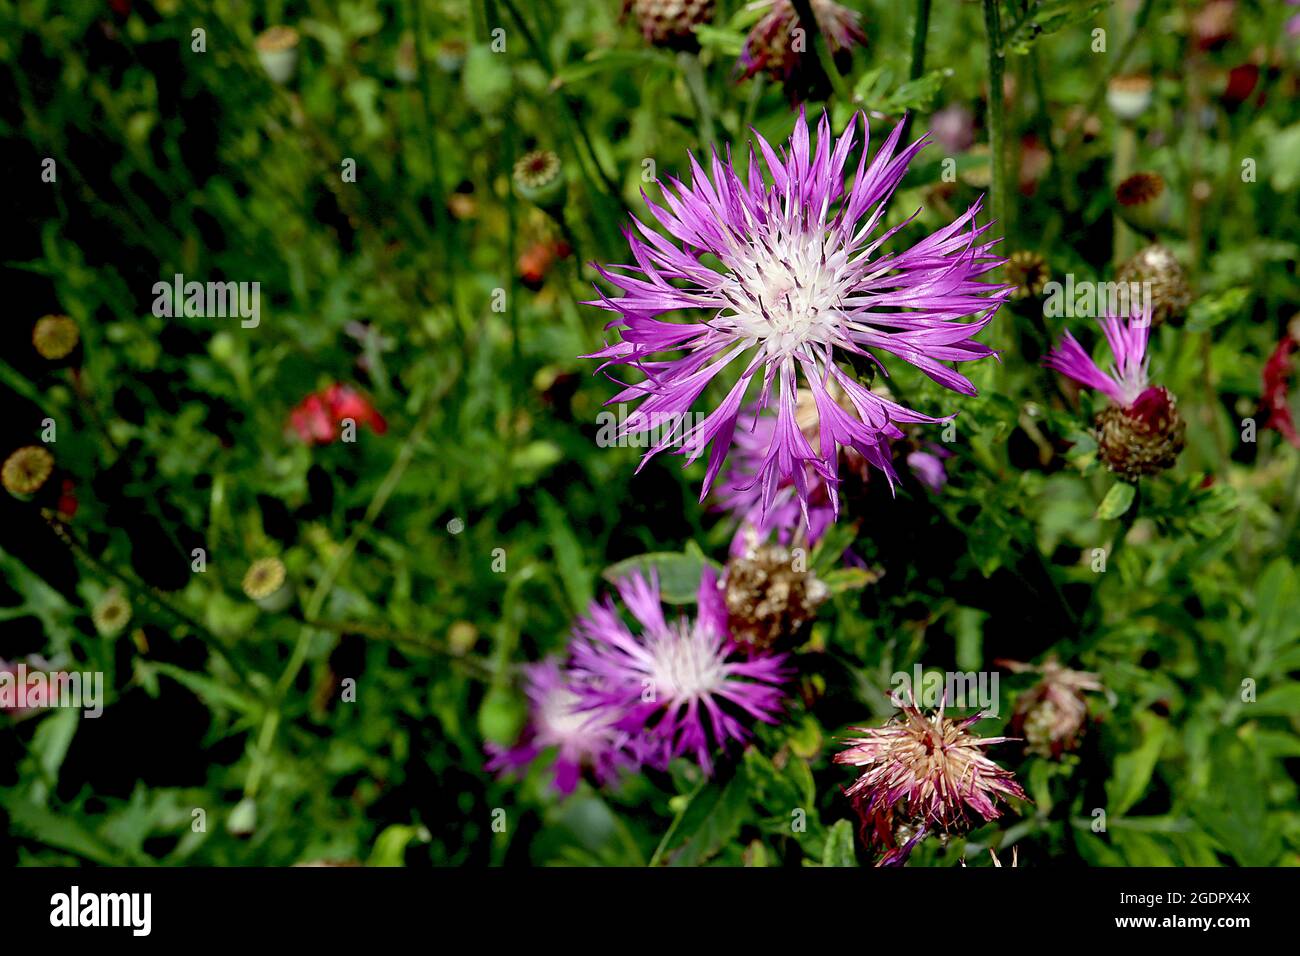 Centaurea hypoleuca ‘John Coutts’ knapweed John Coutts – flower head ring of violet flowers with white centre and purple-tipped stamens,  July, UK Stock Photo